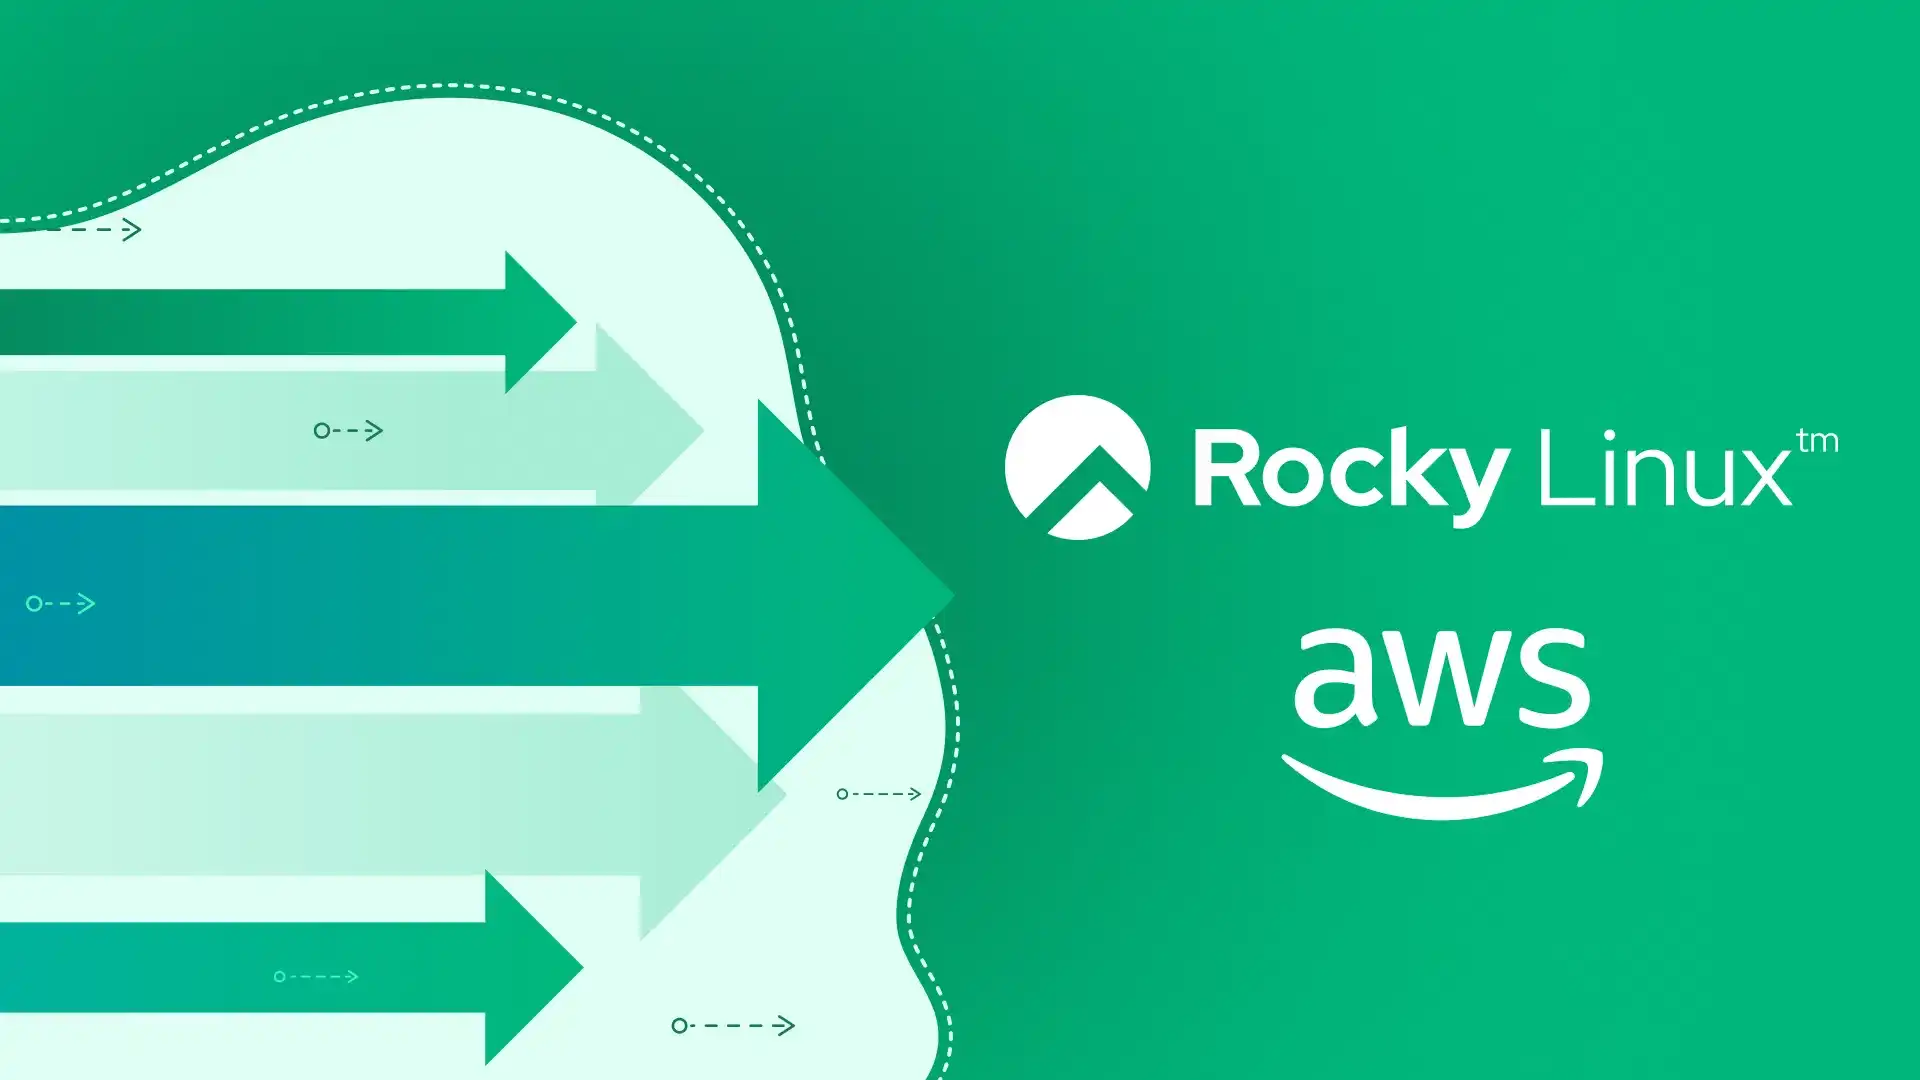 CIQ Offers LTS for Rocky Linux 8.6, 8.8, and 9.2 Images on AWS